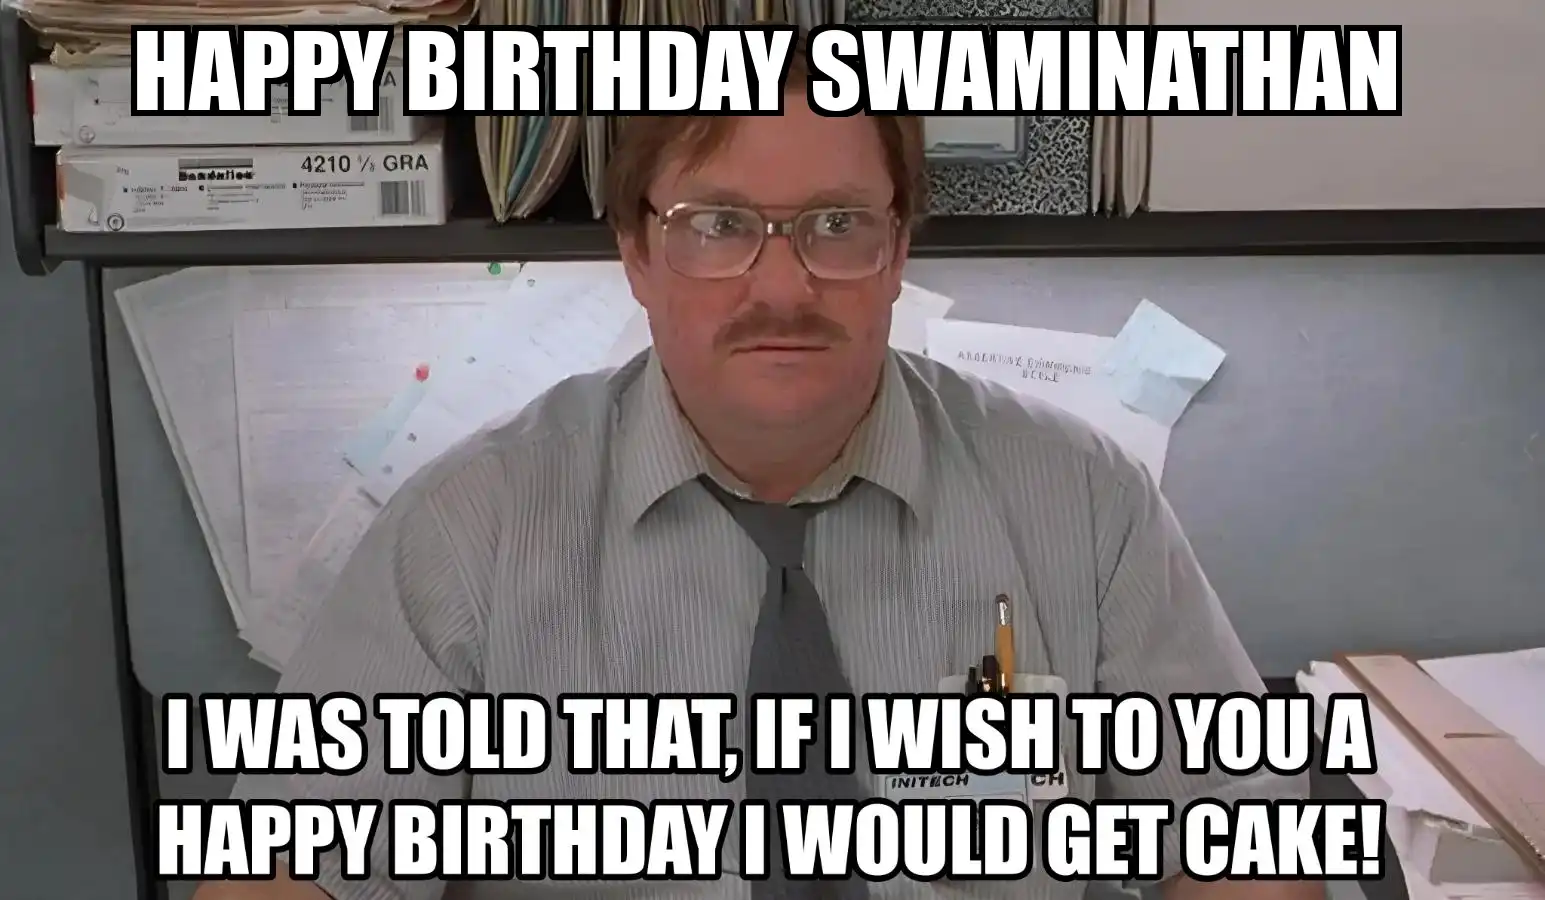 Happy Birthday Swaminathan I Would Get A Cake Meme